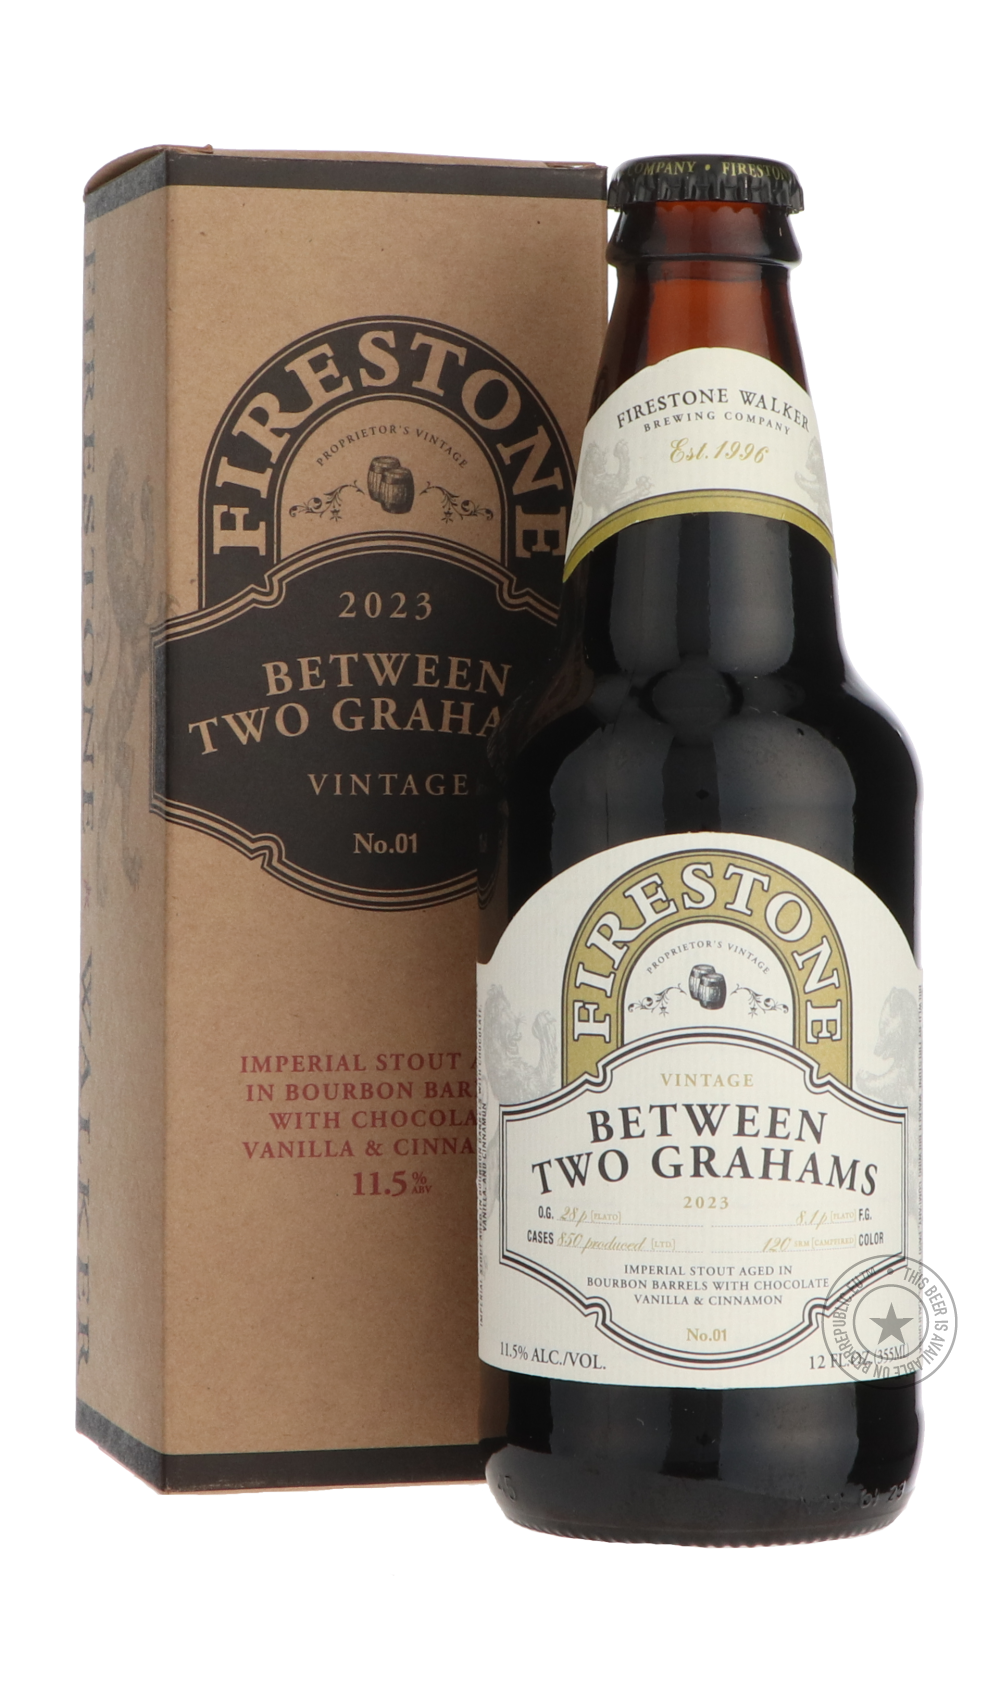 -Firestone Walker- Between Two Grahams-Stout & Porter- Only @ Beer Republic - The best online beer store for American & Canadian craft beer - Buy beer online from the USA and Canada - Bier online kopen - Amerikaans bier kopen - Craft beer store - Craft beer kopen - Amerikanisch bier kaufen - Bier online kaufen - Acheter biere online - IPA - Stout - Porter - New England IPA - Hazy IPA - Imperial Stout - Barrel Aged - Barrel Aged Imperial Stout - Brown - Dark beer - Blond - Blonde - Pilsner - Lager - Wheat - 